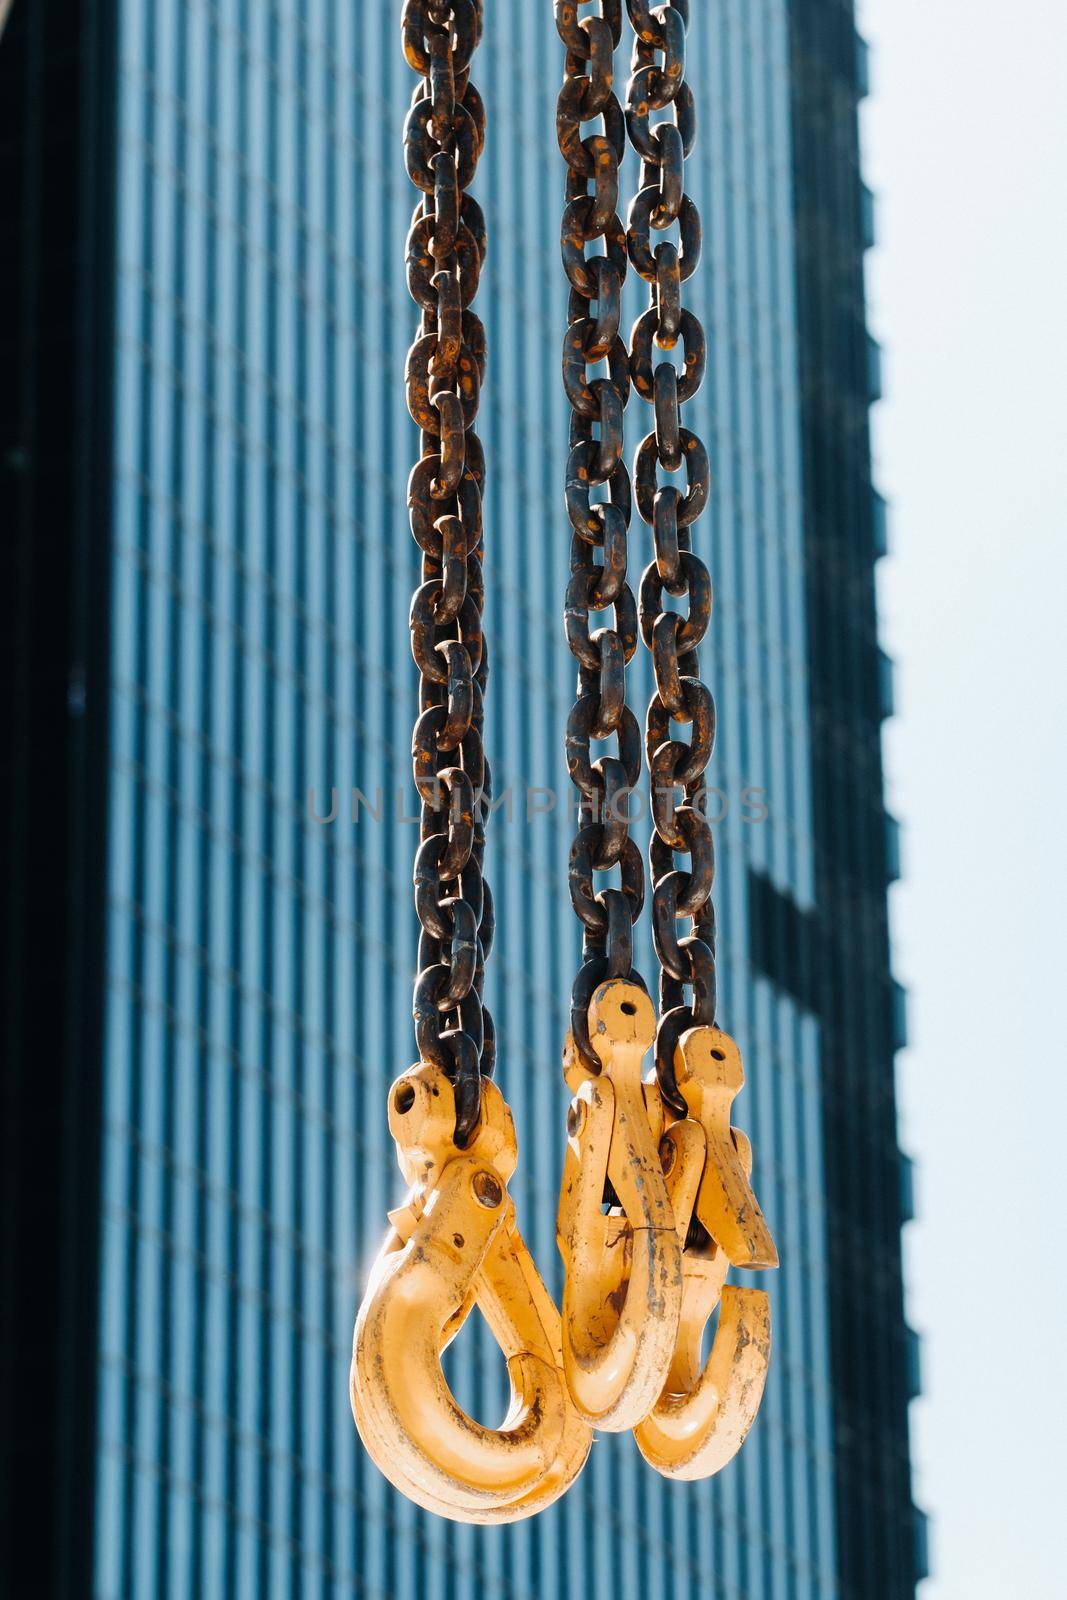 The hooks of the mobile crane near the glass of high buildings.Lots of hooks hanging from chains suspended from a crane by Lobachad